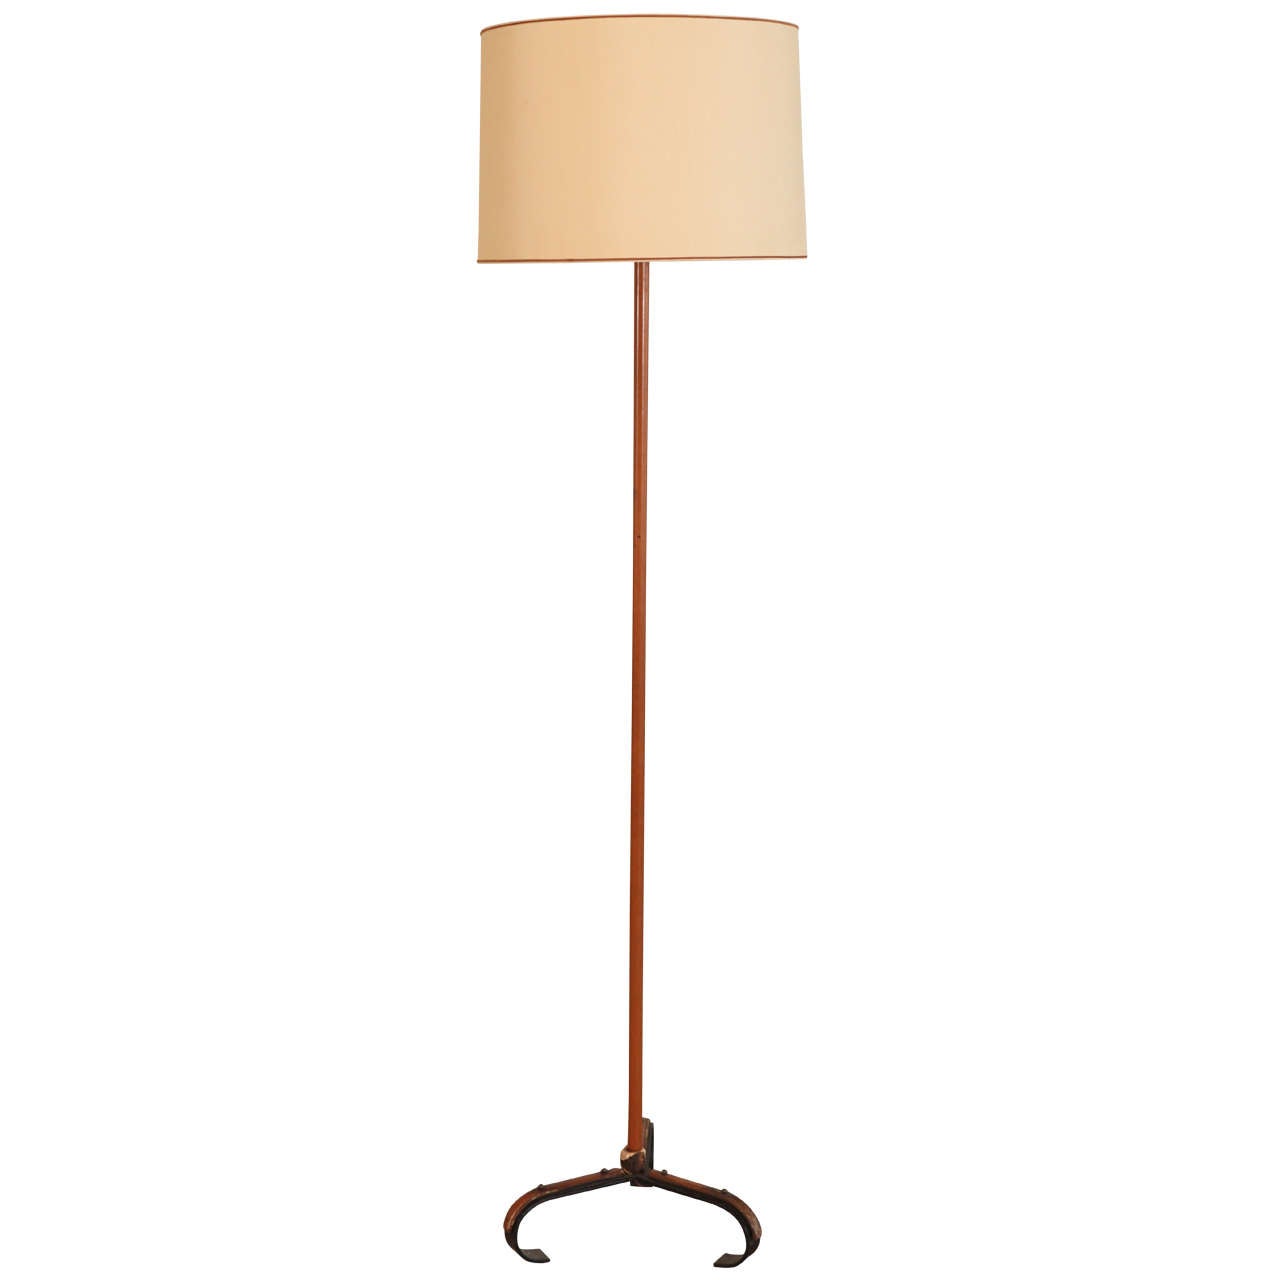 Jacques Adnet Leather Bound Floor Lamp